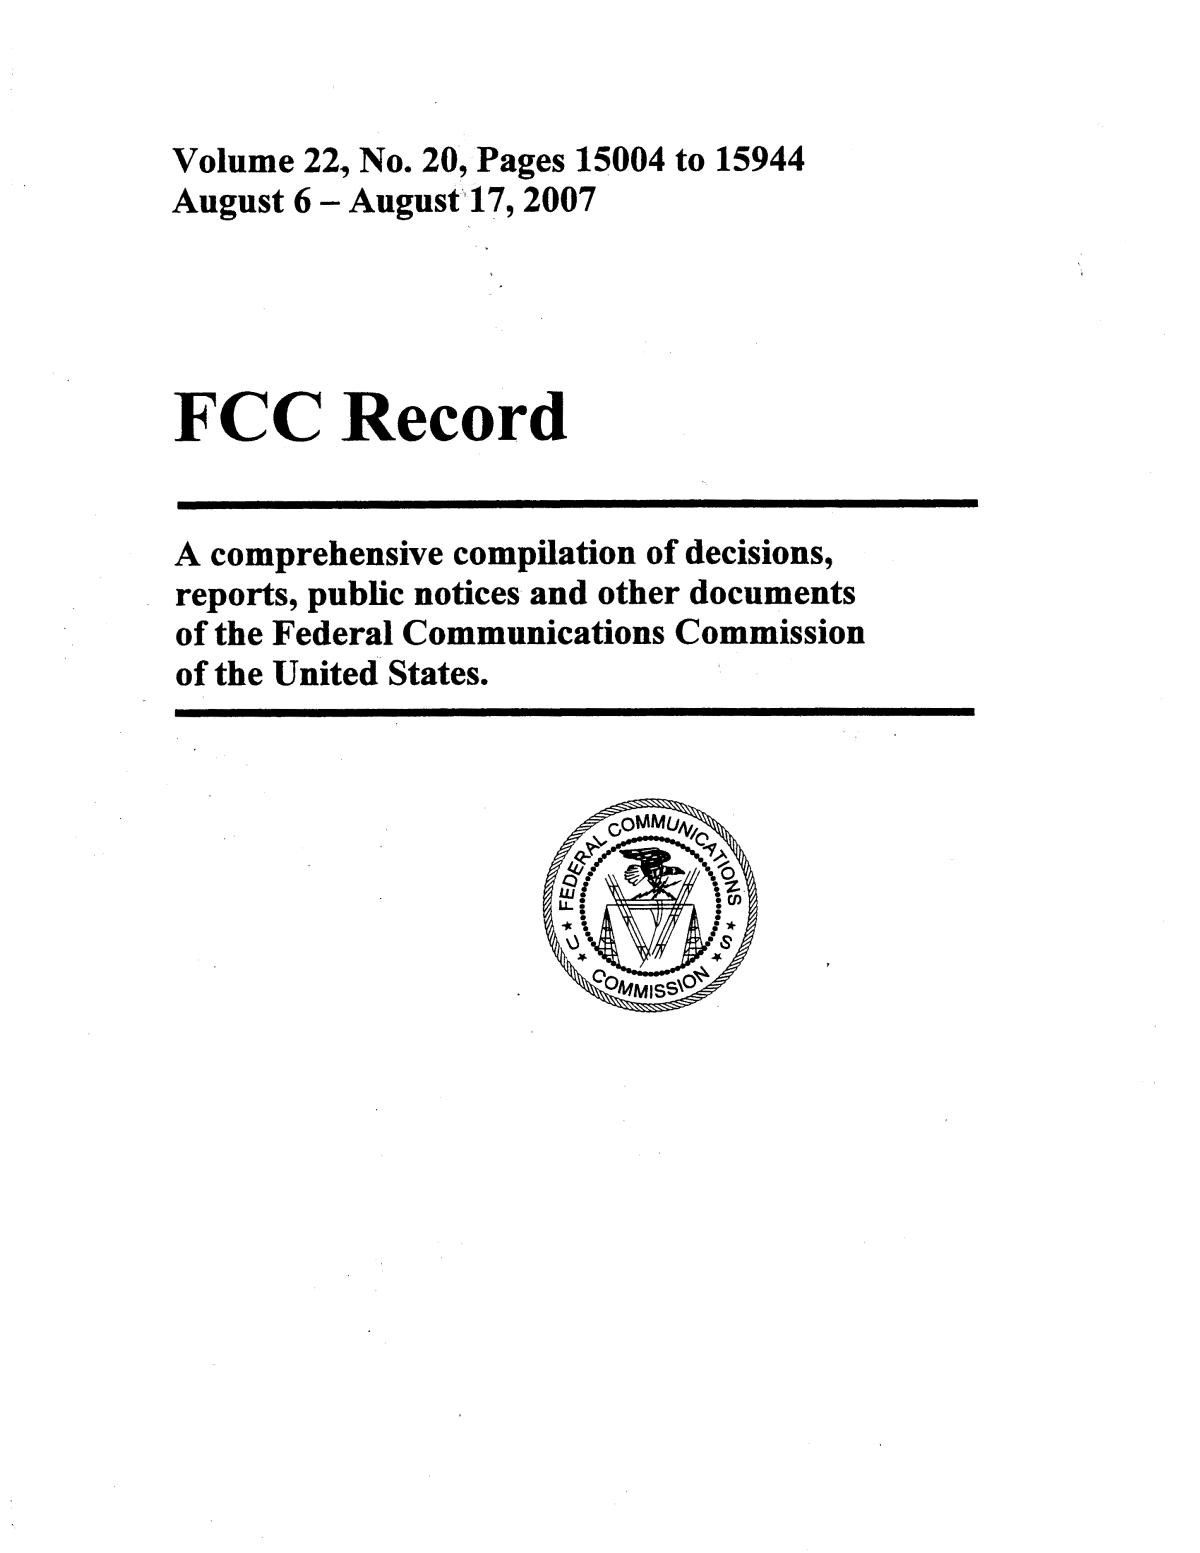 FCC Record, Volume 22, No. 20, Pages 15004 to 15944, August 6 - August 17, 2007
                                                
                                                    Front Cover
                                                